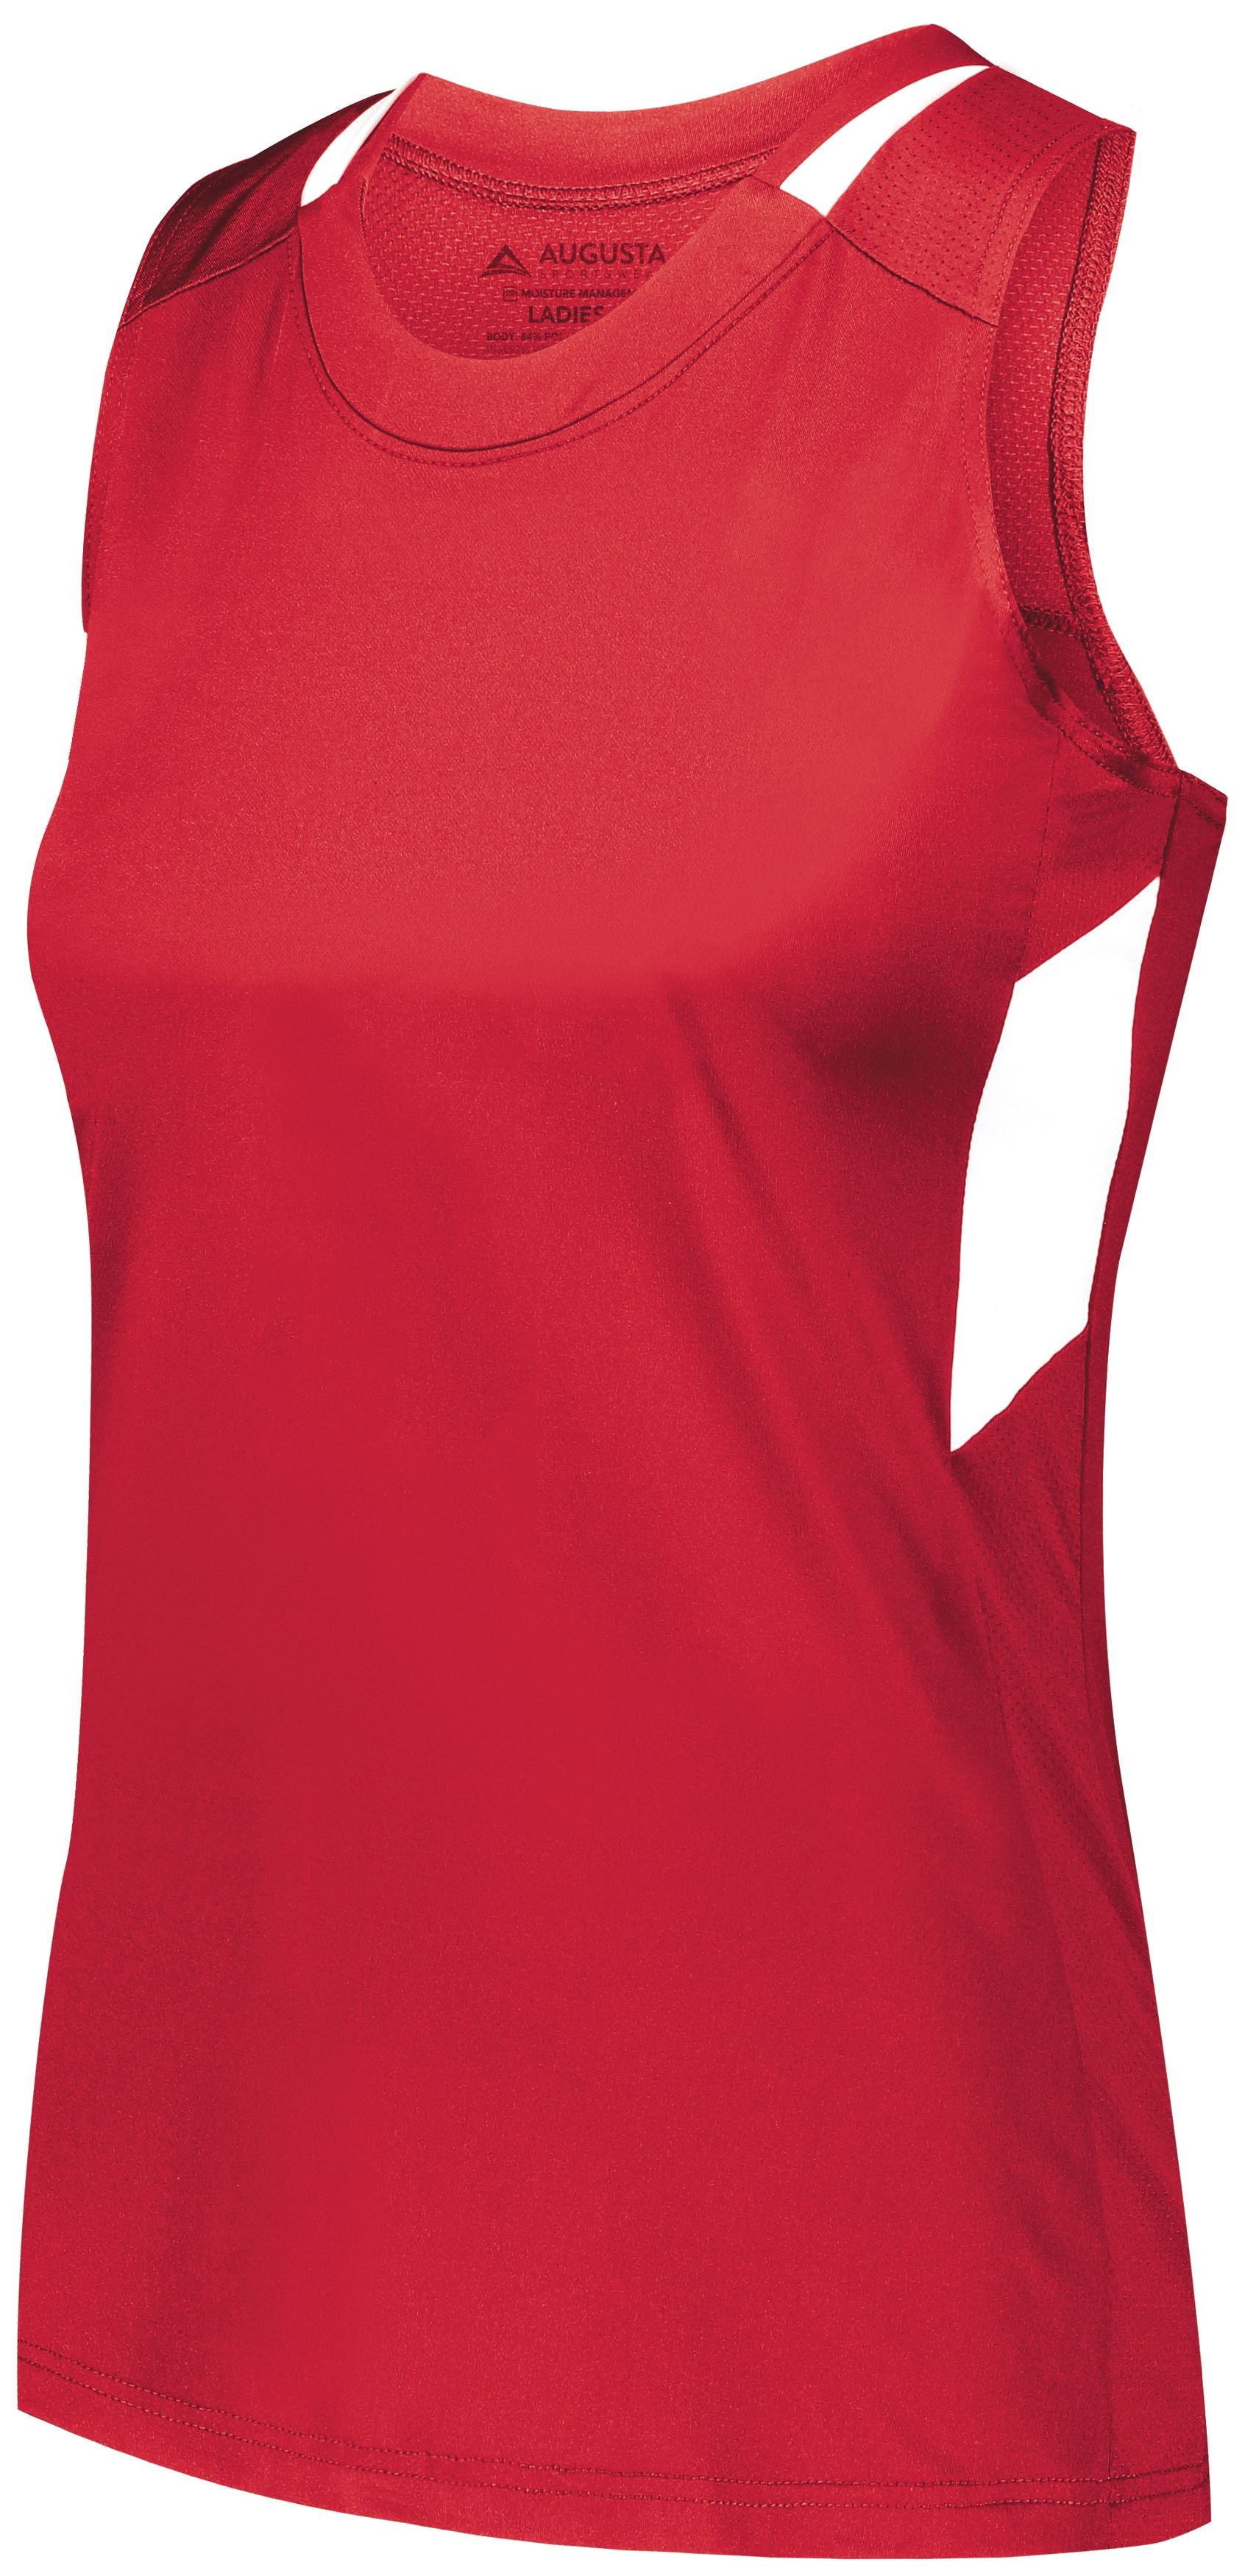 Augusta Sportswear Ladies Crossover Tank in Red/White  -Part of the Ladies, Ladies-Tank, Augusta-Products, Lacrosse, Shirts, All-Sports, All-Sports-1 product lines at KanaleyCreations.com